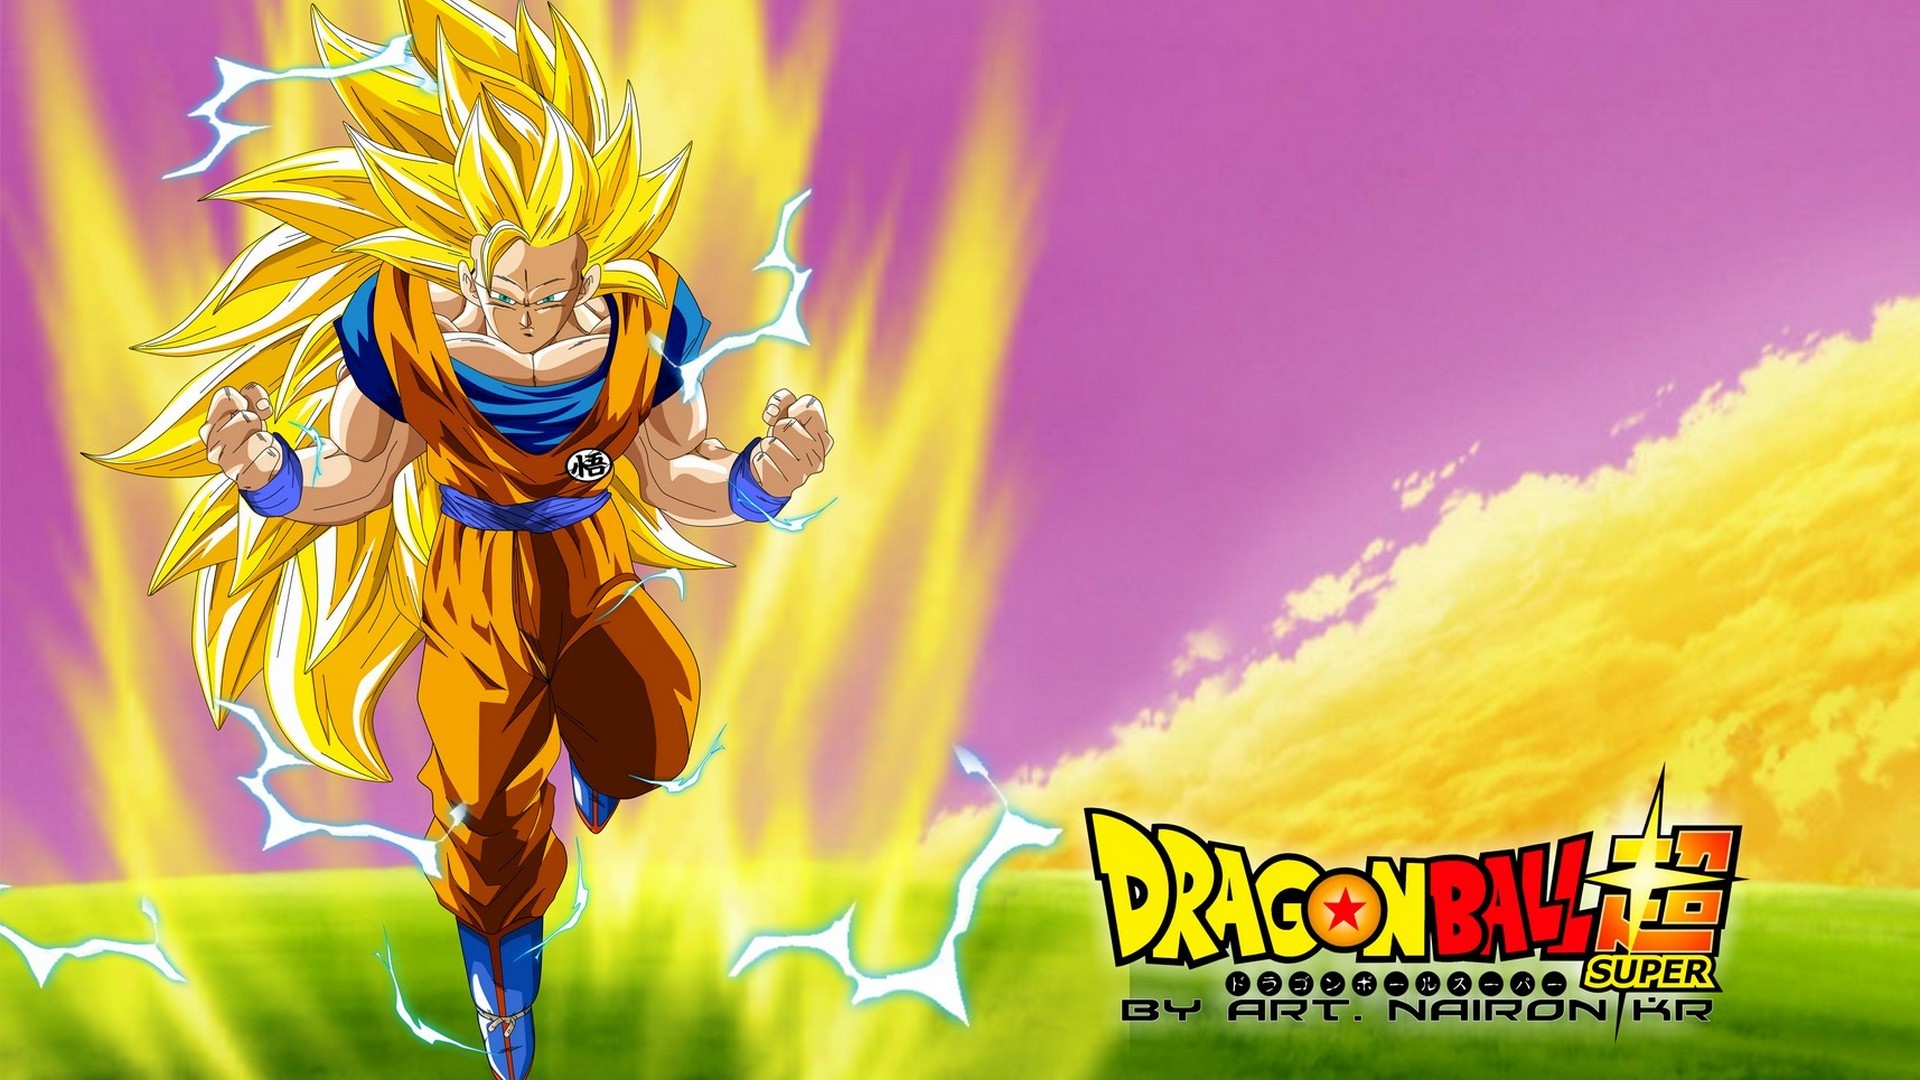 Goku SSJ3 Wallpaper For Desktop with resolution 1920X1080 pixel. You can use this wallpaper as background for your desktop Computer Screensavers, Android or iPhone smartphones